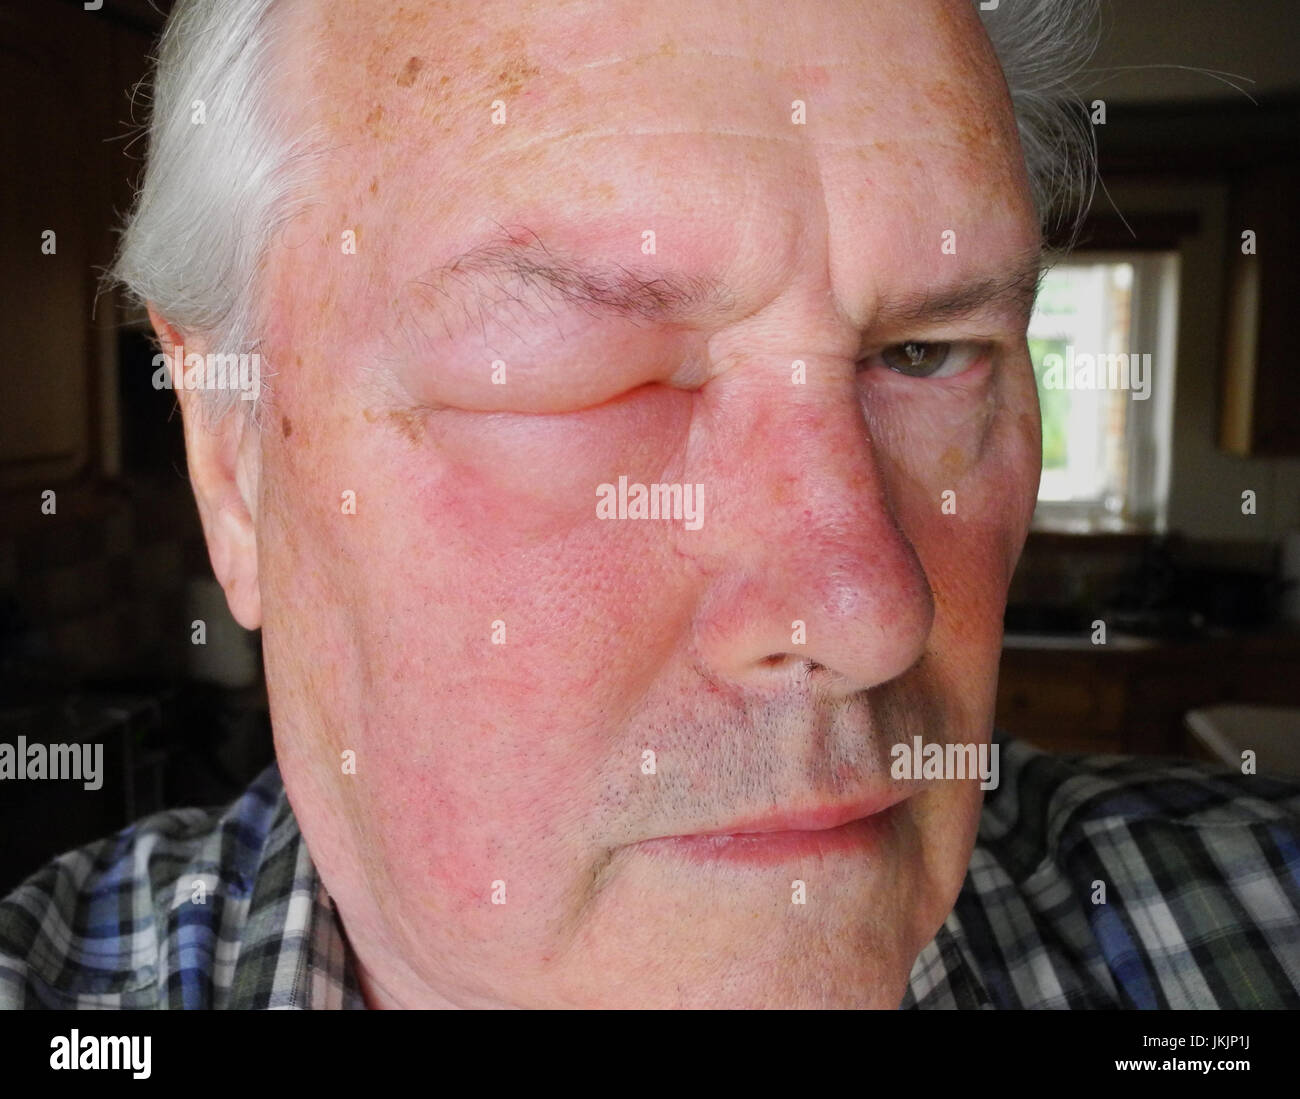 The image shows an allergic reaction to a wasp, bee, hornet, insect sting.  The reaction to a venomous sting can range from mild to fatal.  This image does NOT require a model release as the subject is the photographer. The sting was from a so-called social wasp - the photographer considers that the action was not very sociable ! Stock Photo